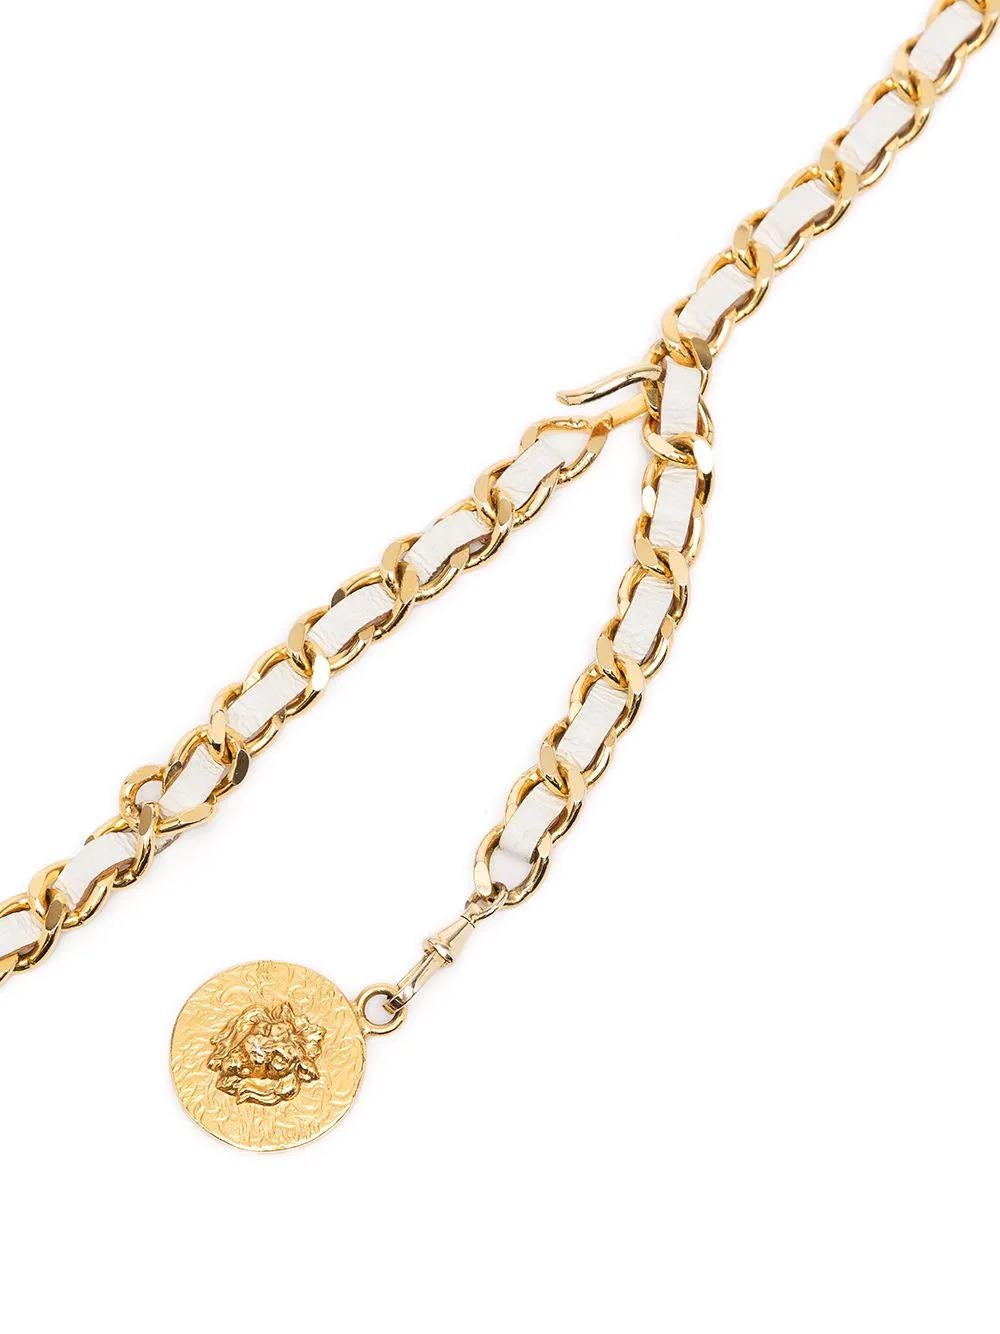 Exuding femininity, this gold-plated white leather signature chain belt is finished with the classic Chanel logo medallion. Define your waist in a chic manner with this pre-owned Chanel chain belt.

Colour: White/Gold

Composition: Leather,